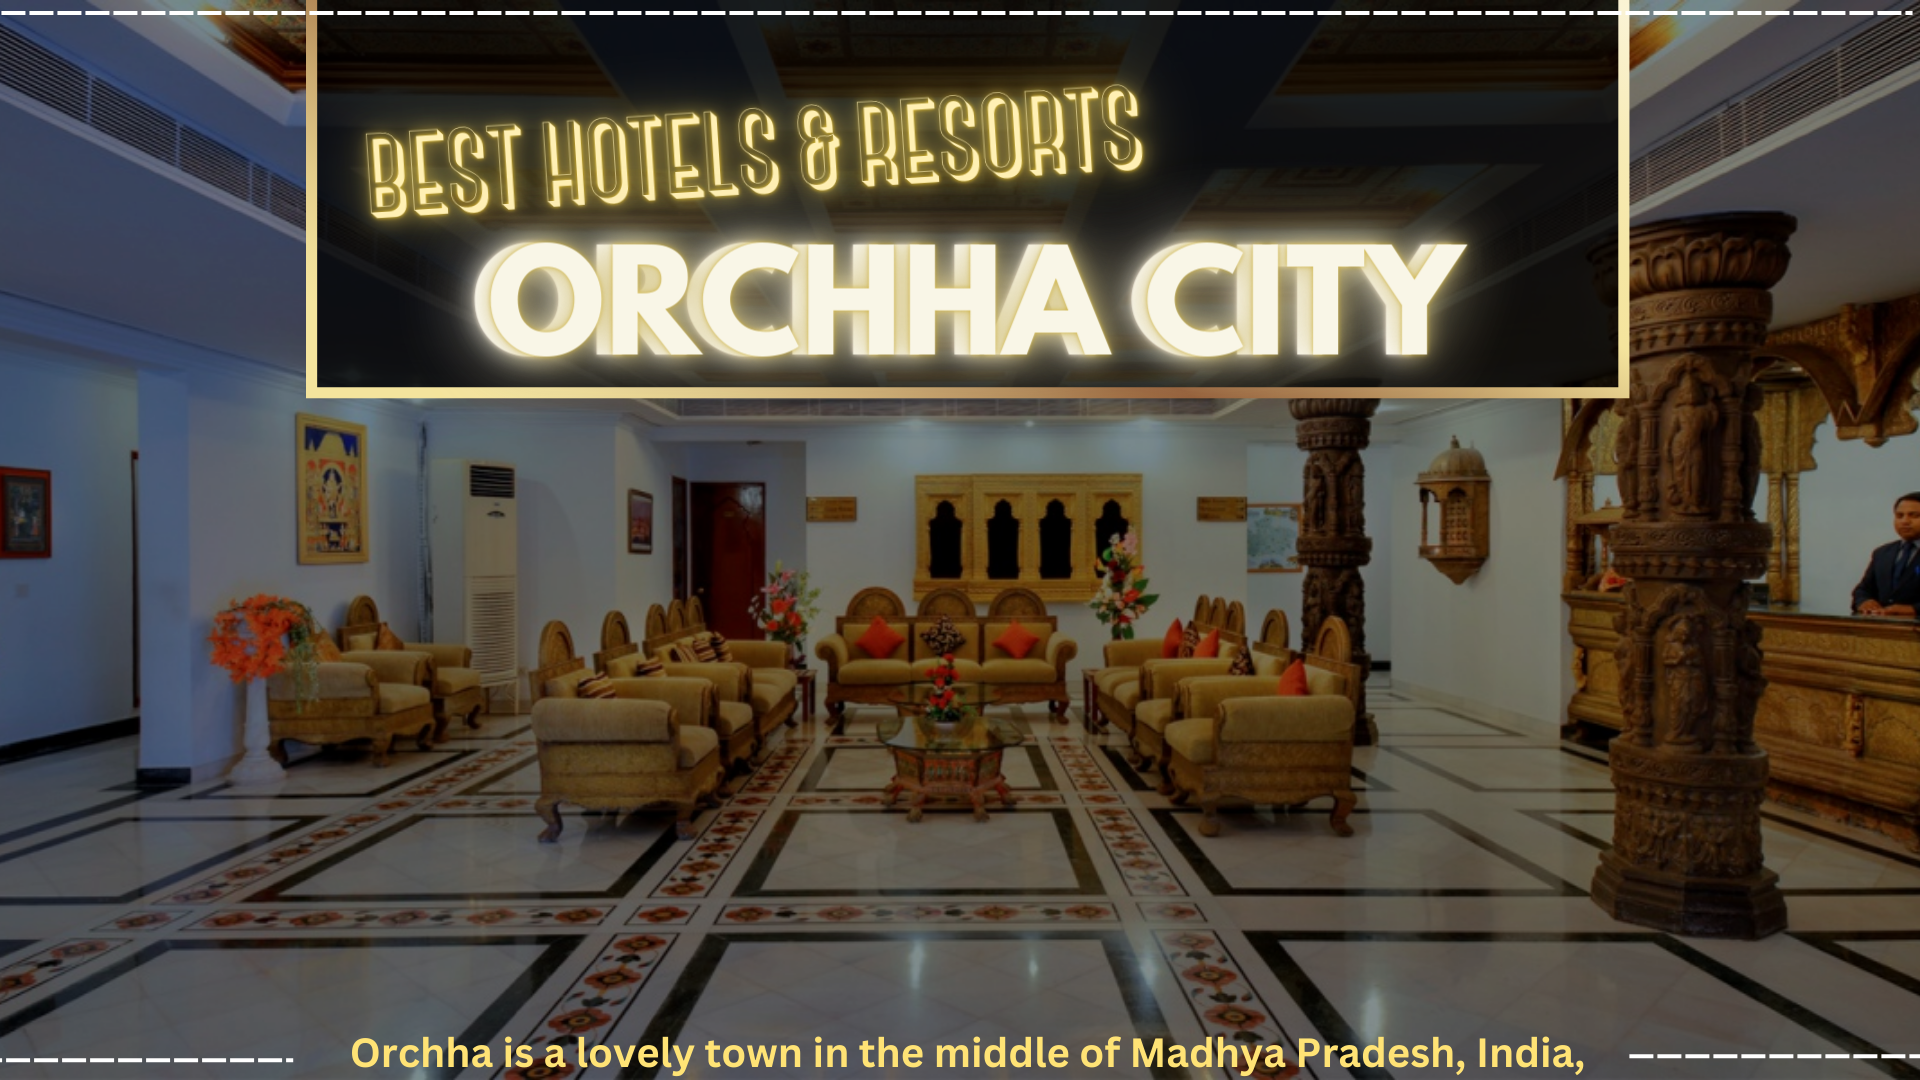 Resort and Hotel in Orchha